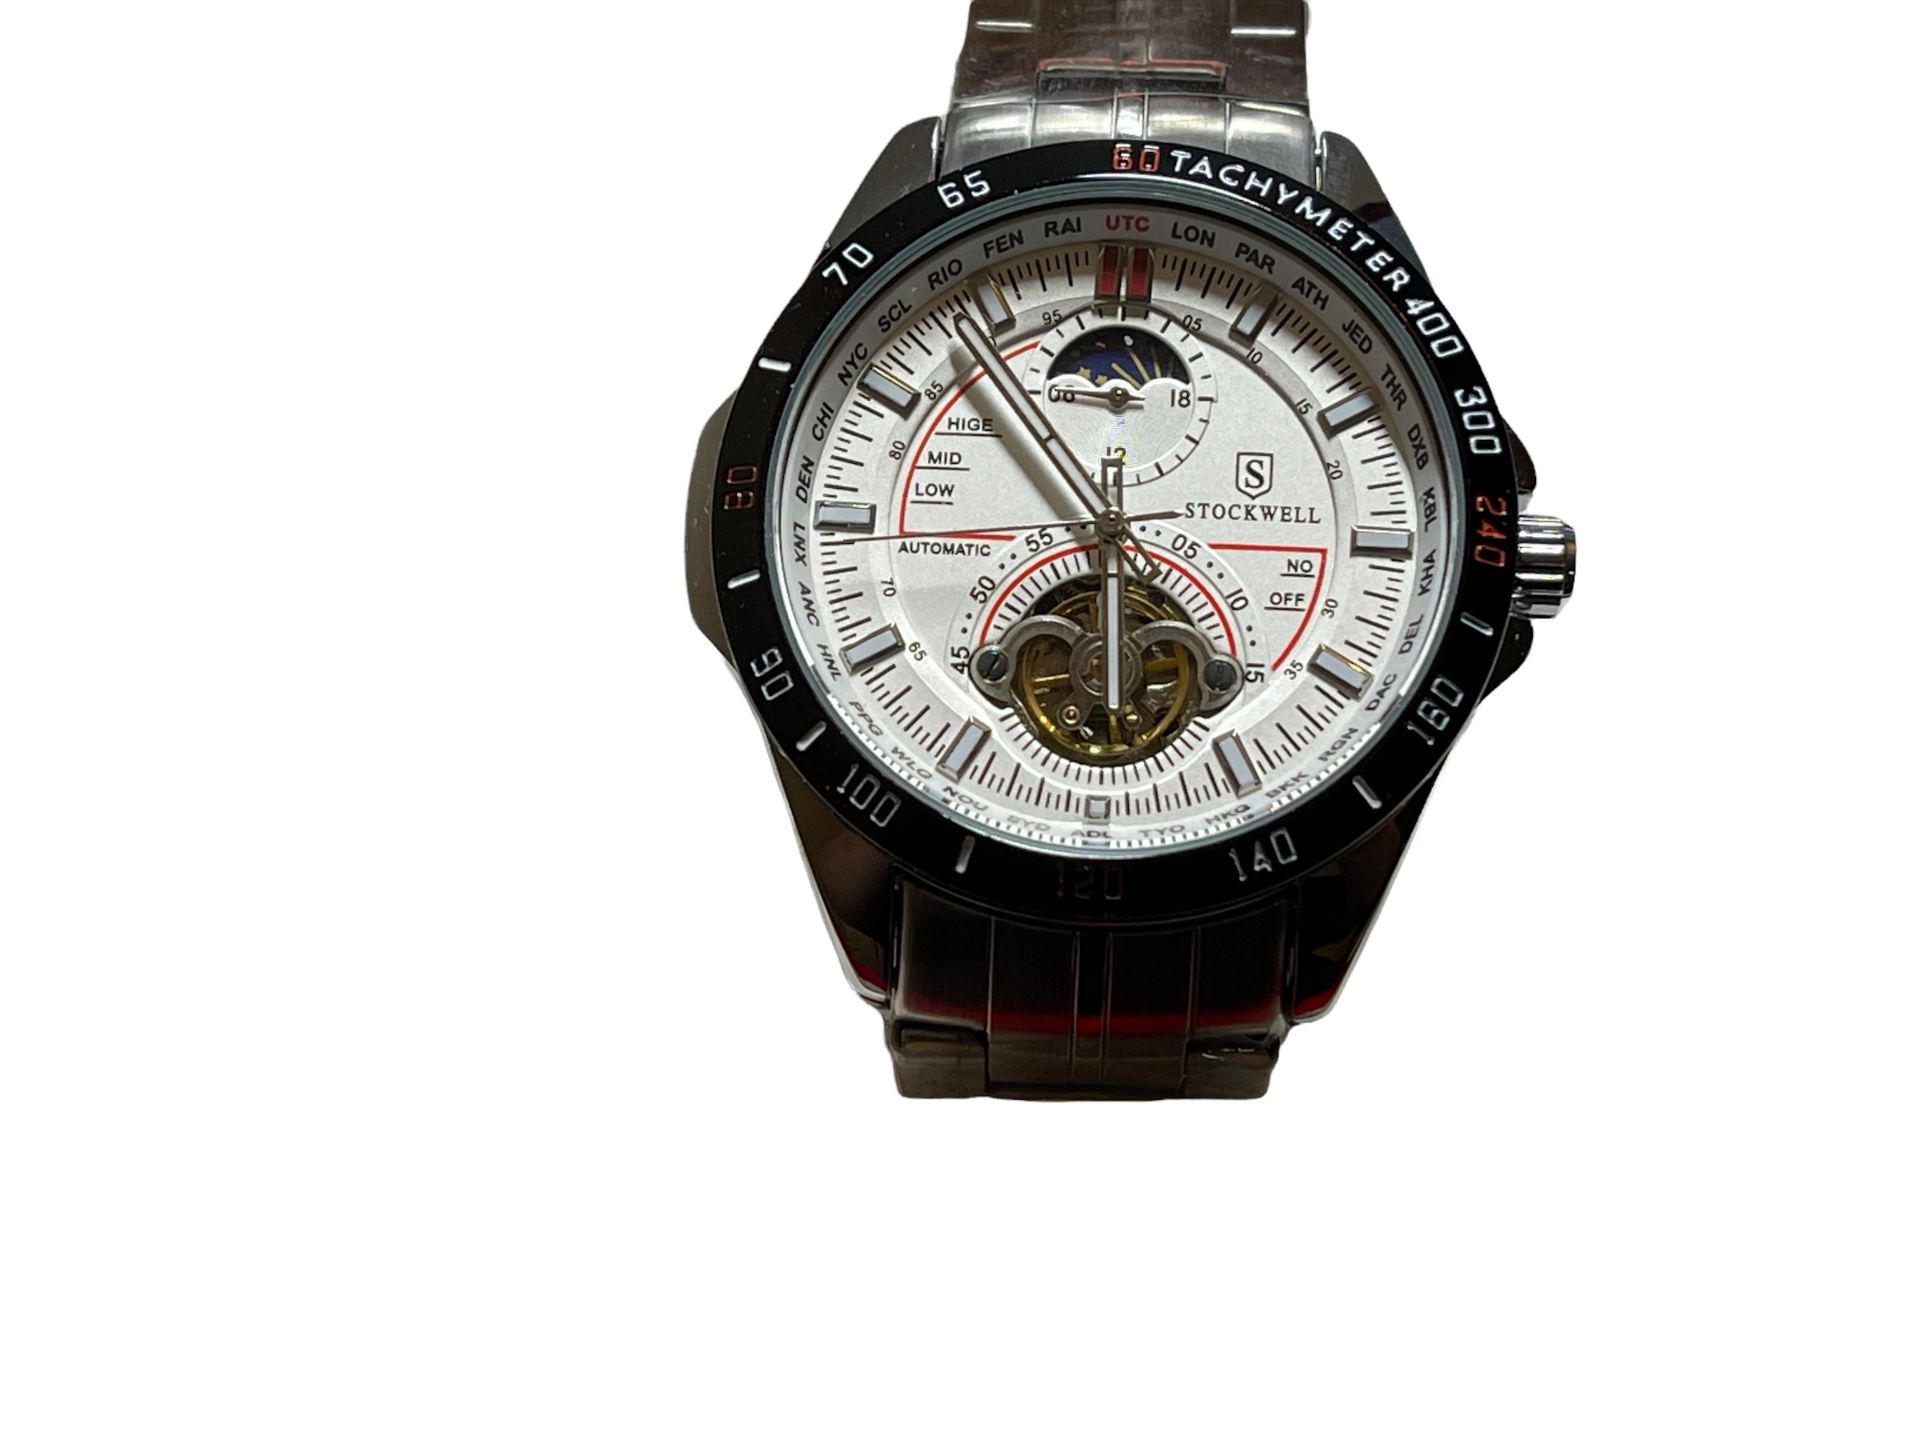 Stockwell Automatic Limited Edition Moon Chronograph Men's watch RRP £500 - Surplus stock - Image 2 of 6